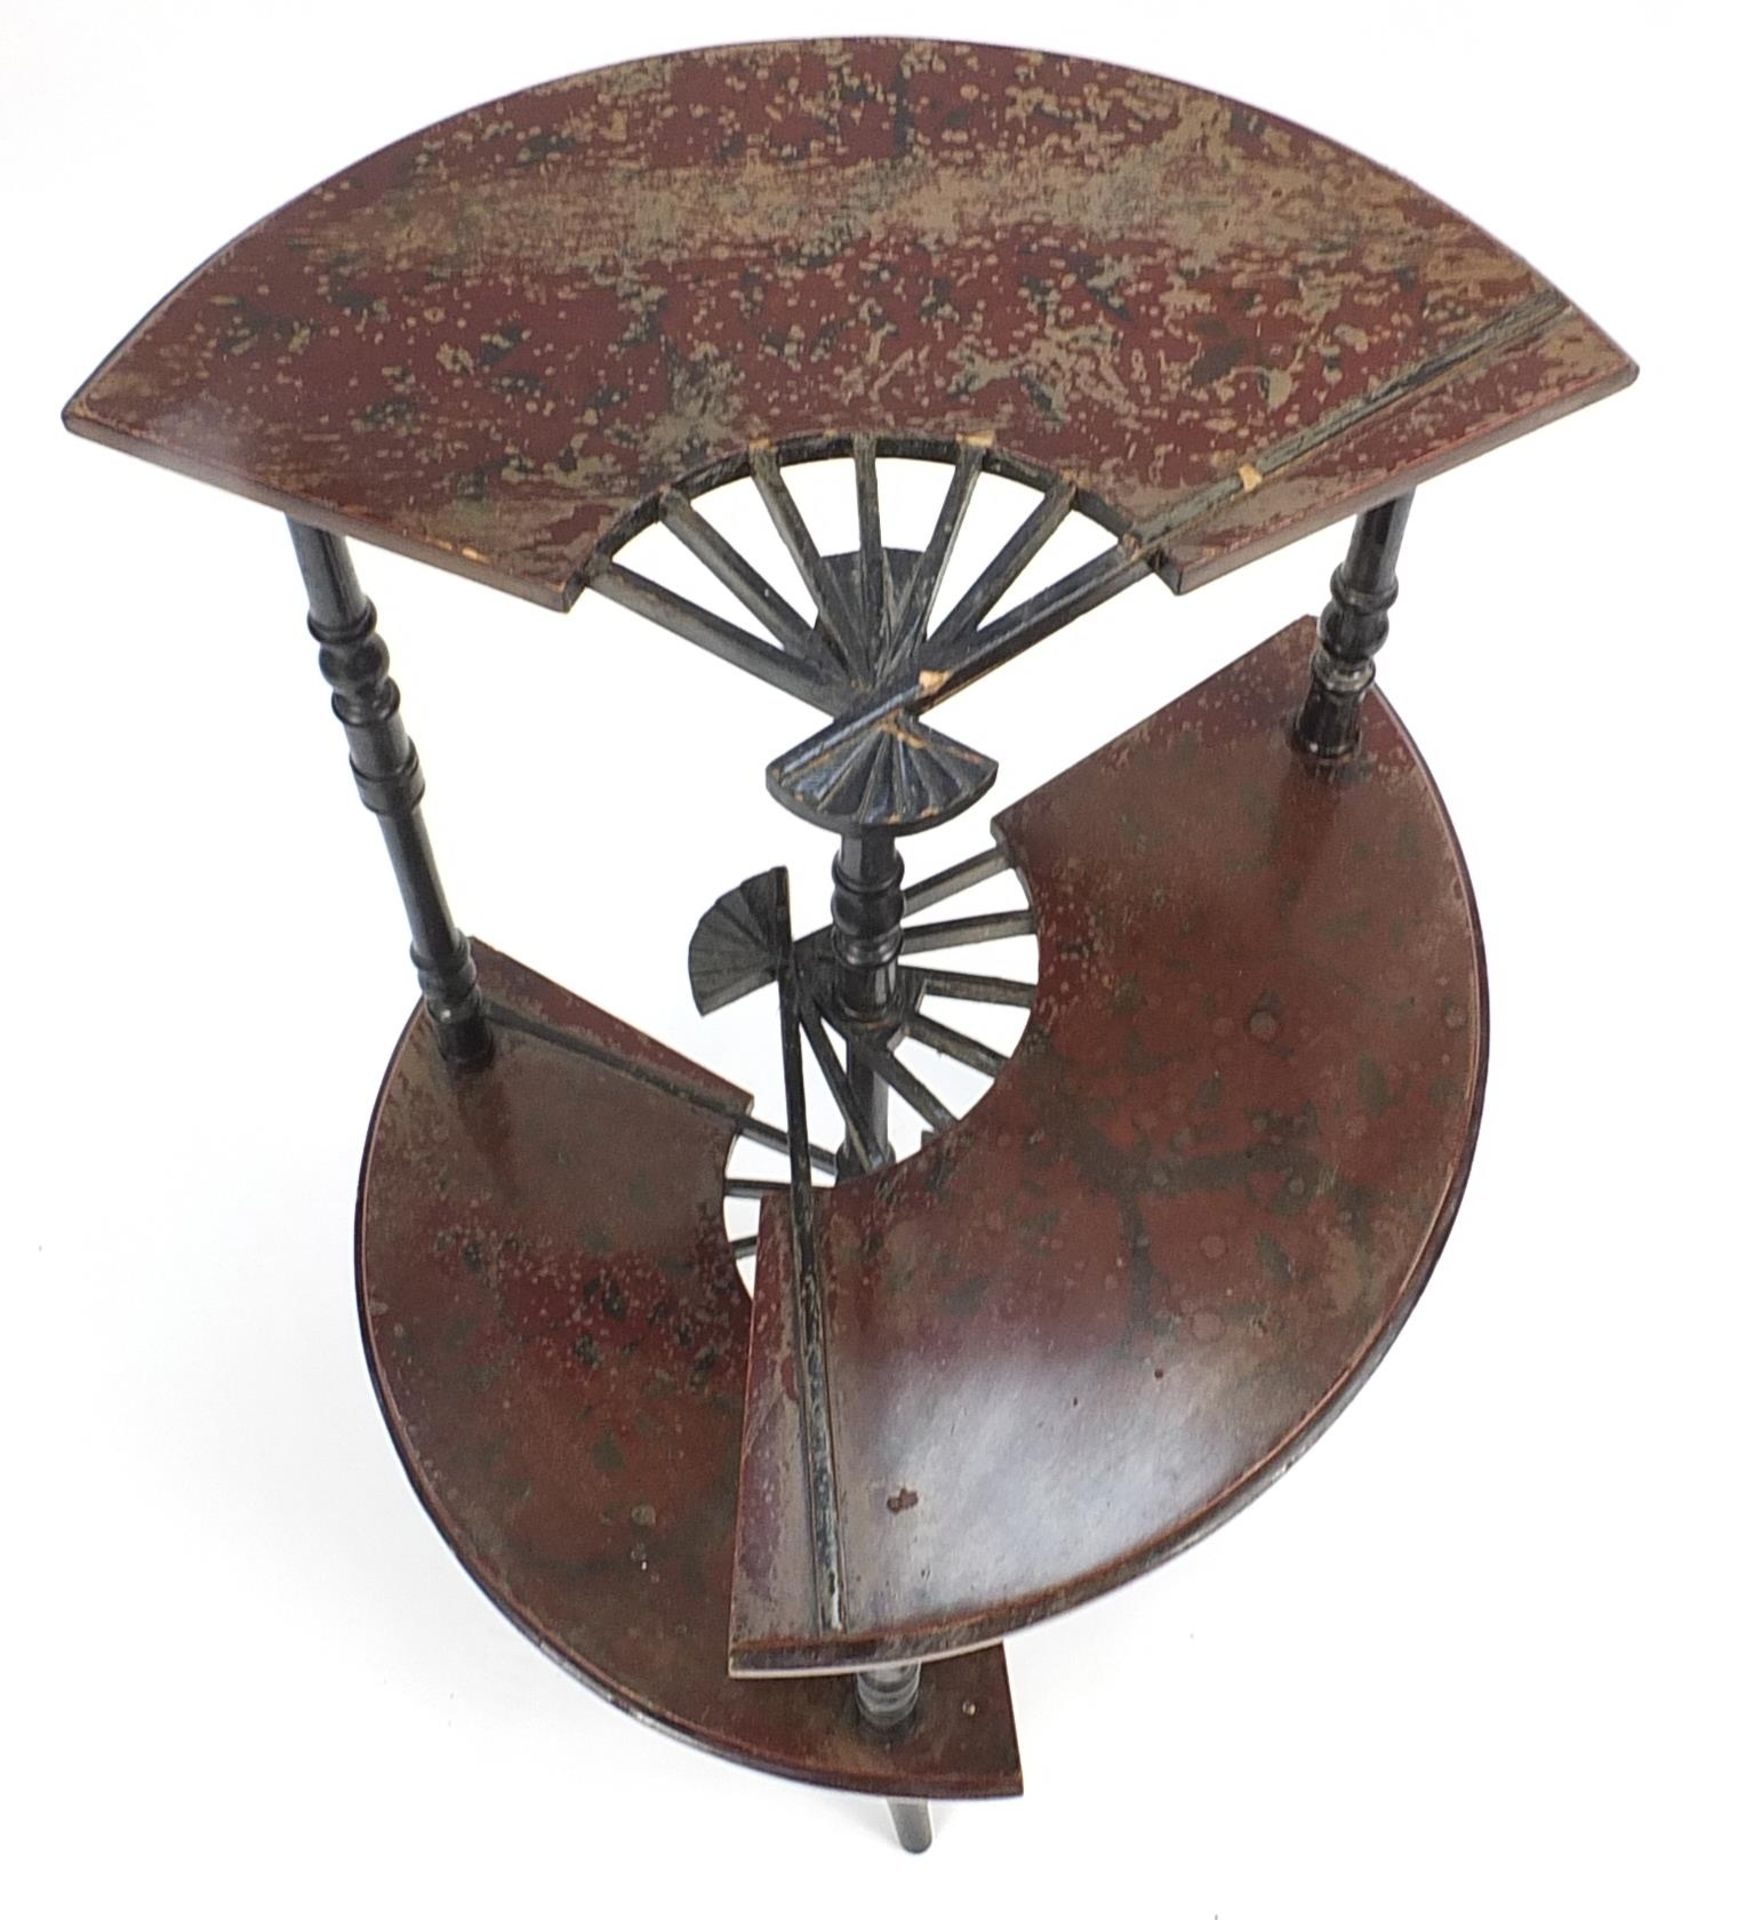 Japanese lacquered three tier stand in the form of fans, 83cm H x 58cm in diameter - Image 3 of 3